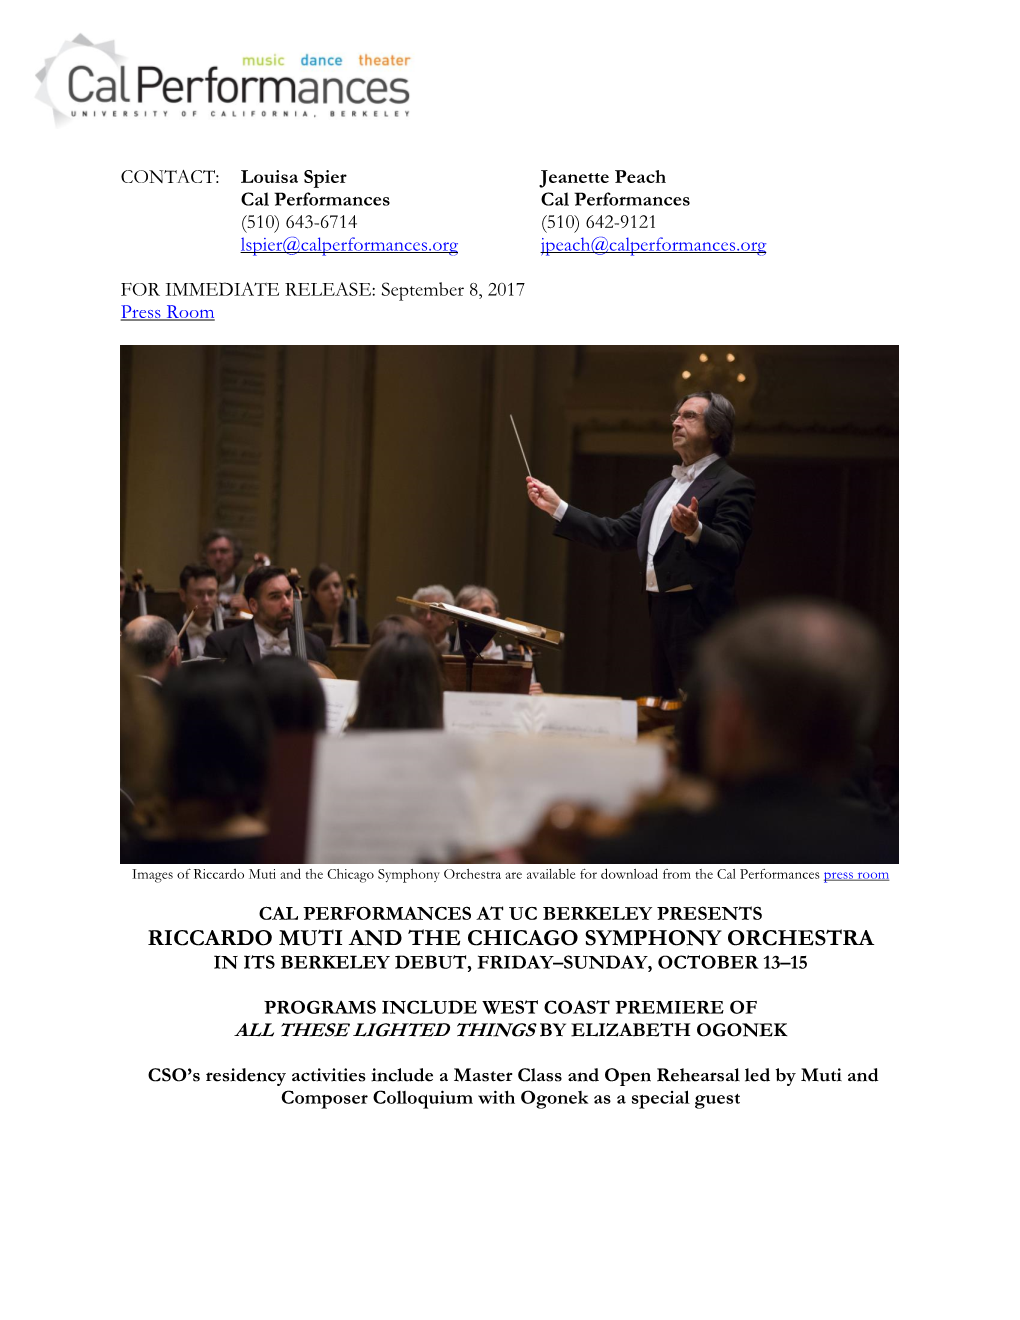 Riccardo Muti and the Chicago Symphony Orchestra Are Available for Download from the Cal Performances Press Room